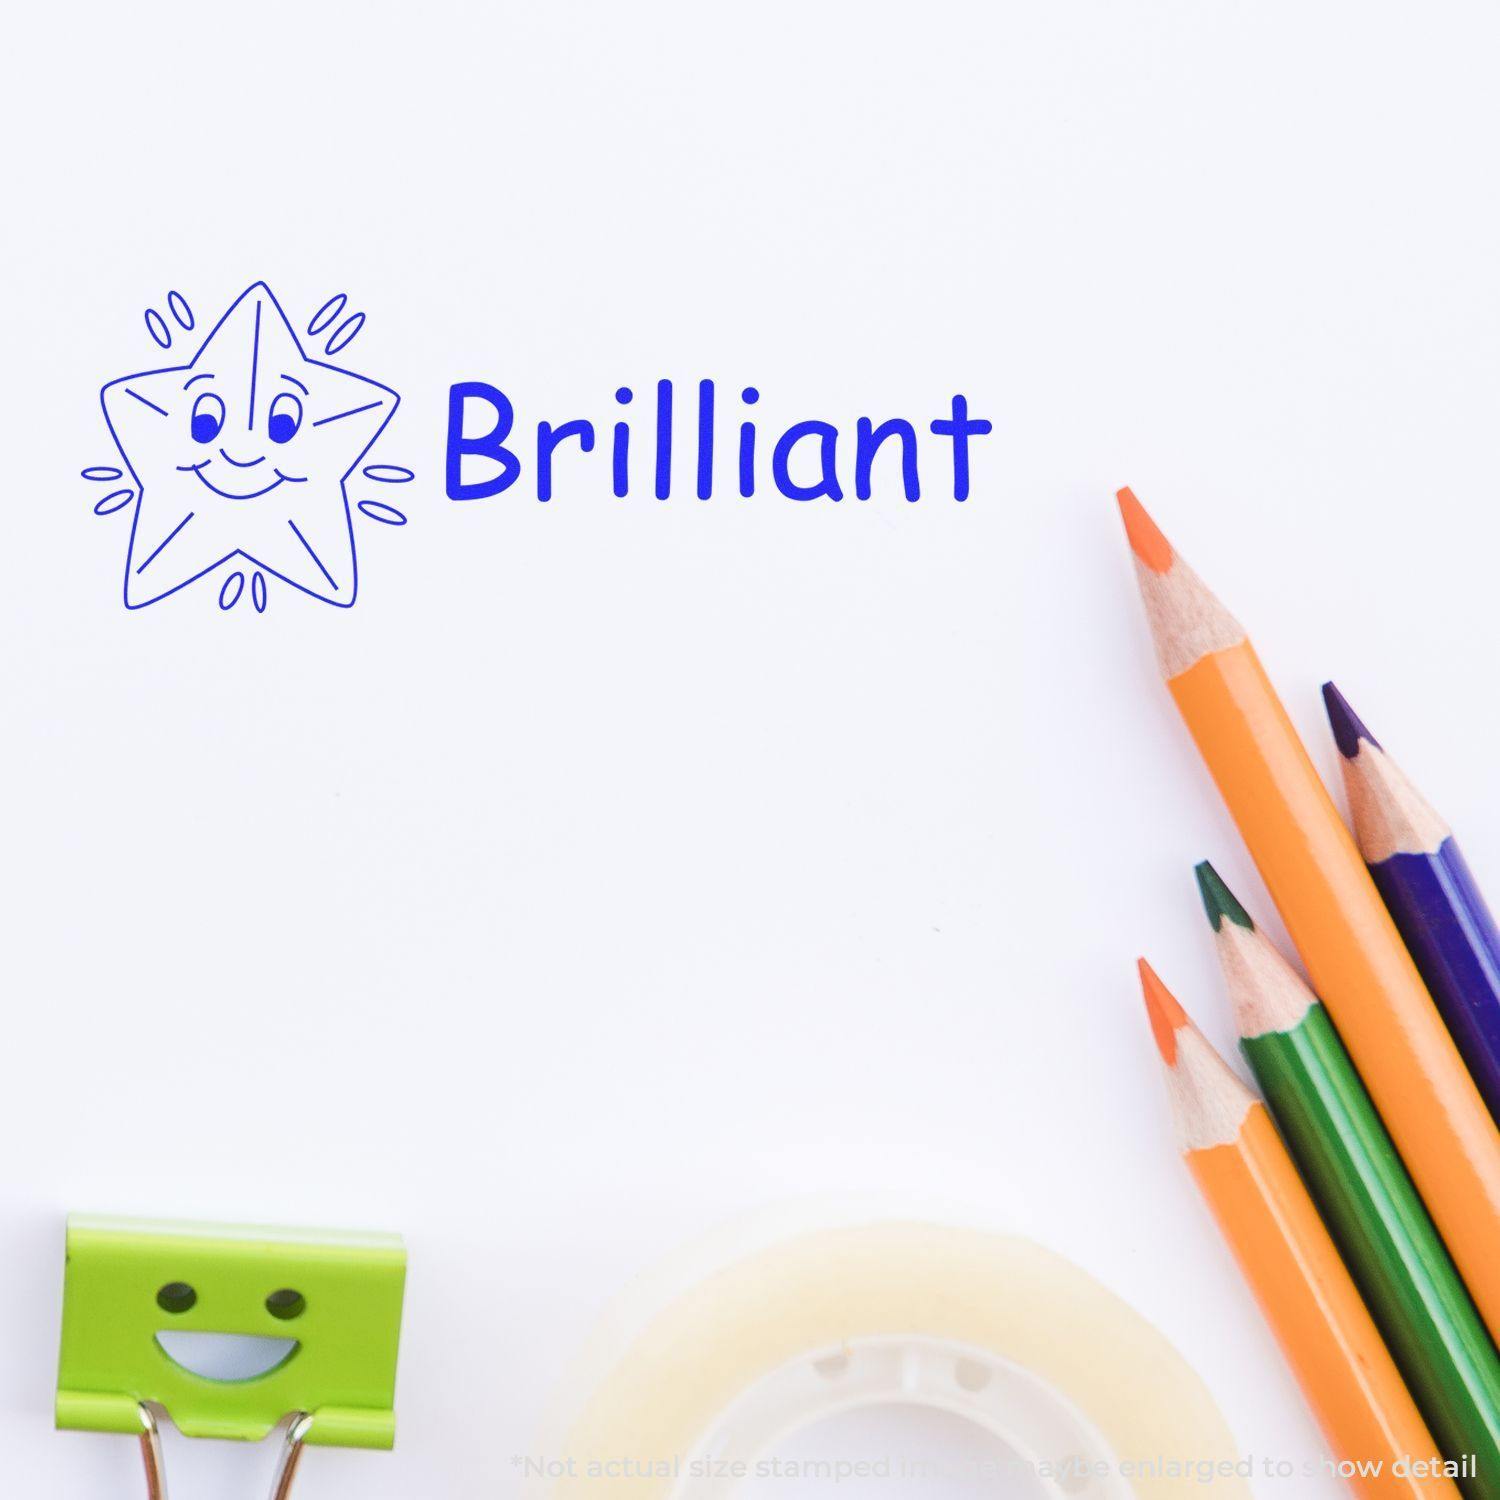 A self-inking stamp with a stamped image showing how the text "Brilliant" with a shining smiley star in a large font is displayed by it after stamping.